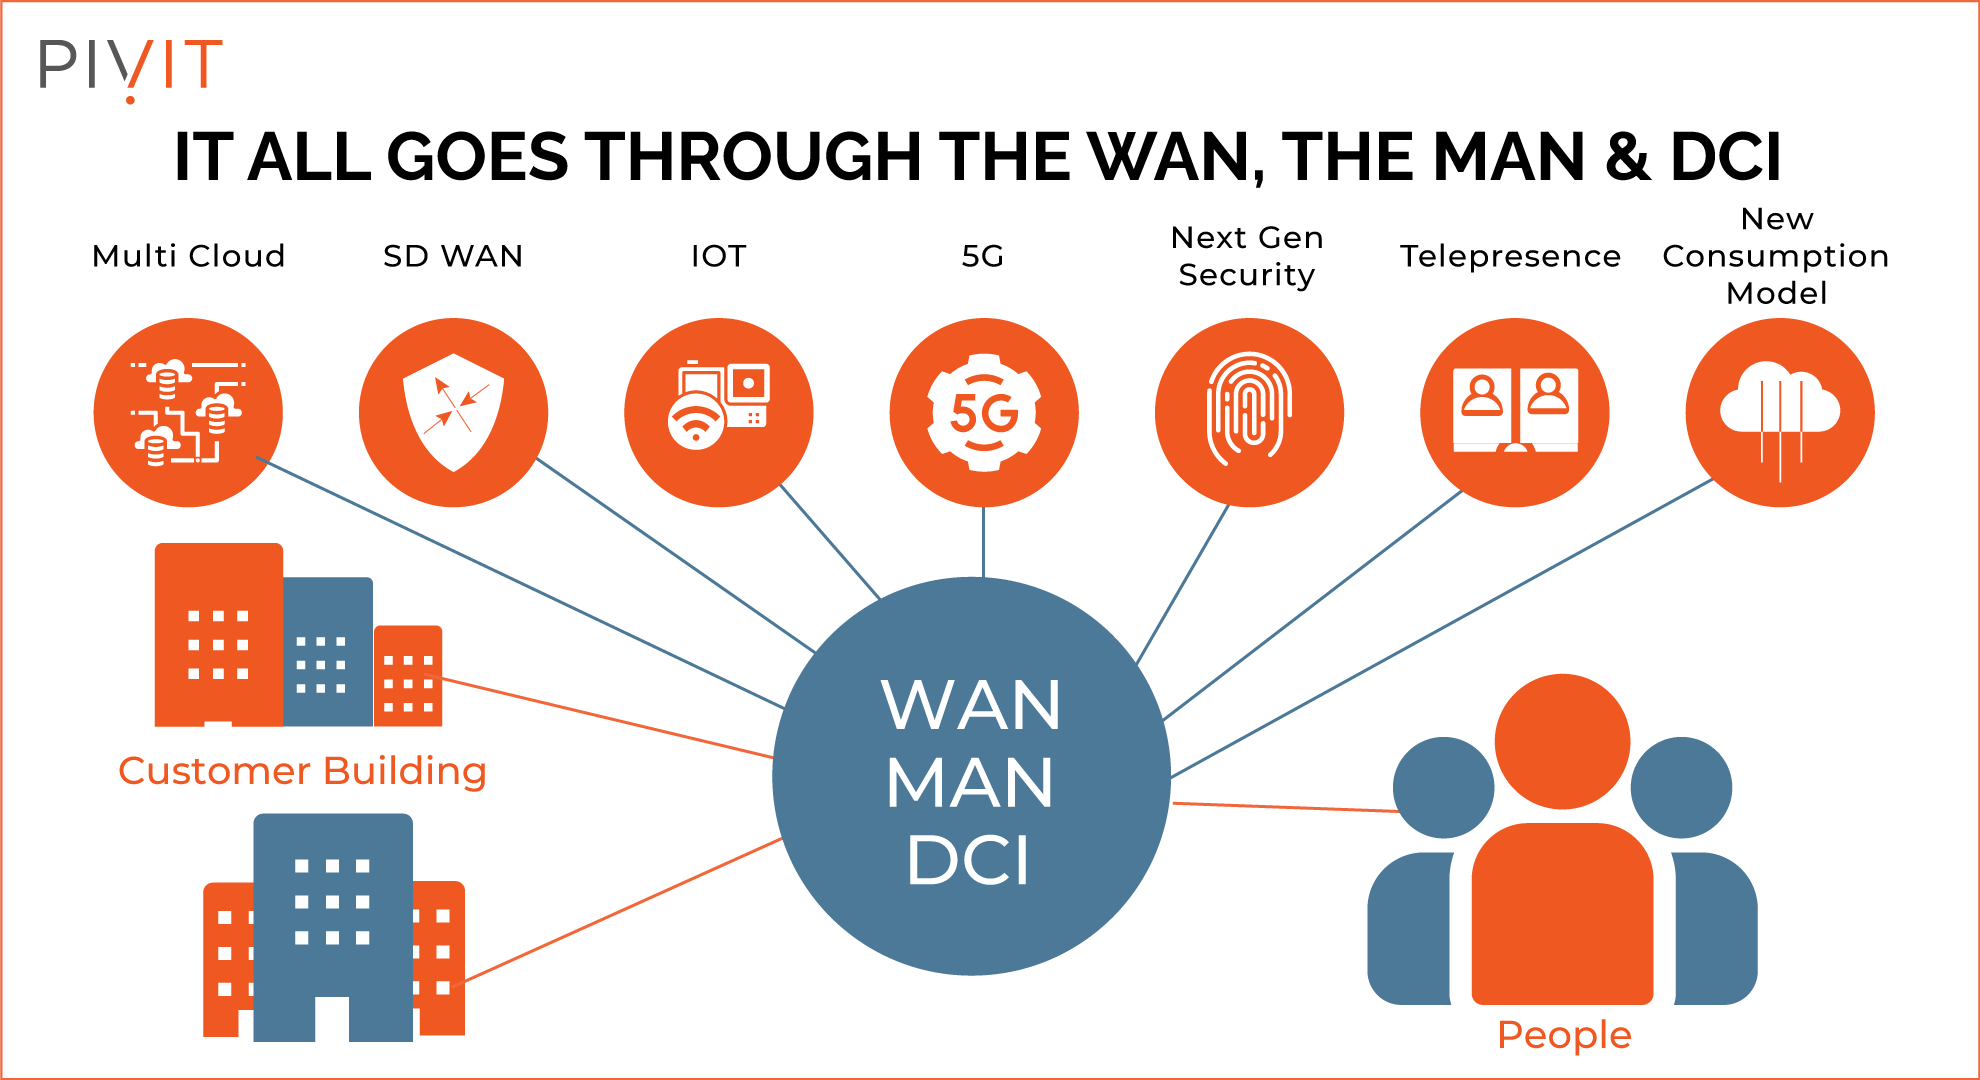 WAN, MAN, DCI spider diagram showing various technologies such as IoT and 5G